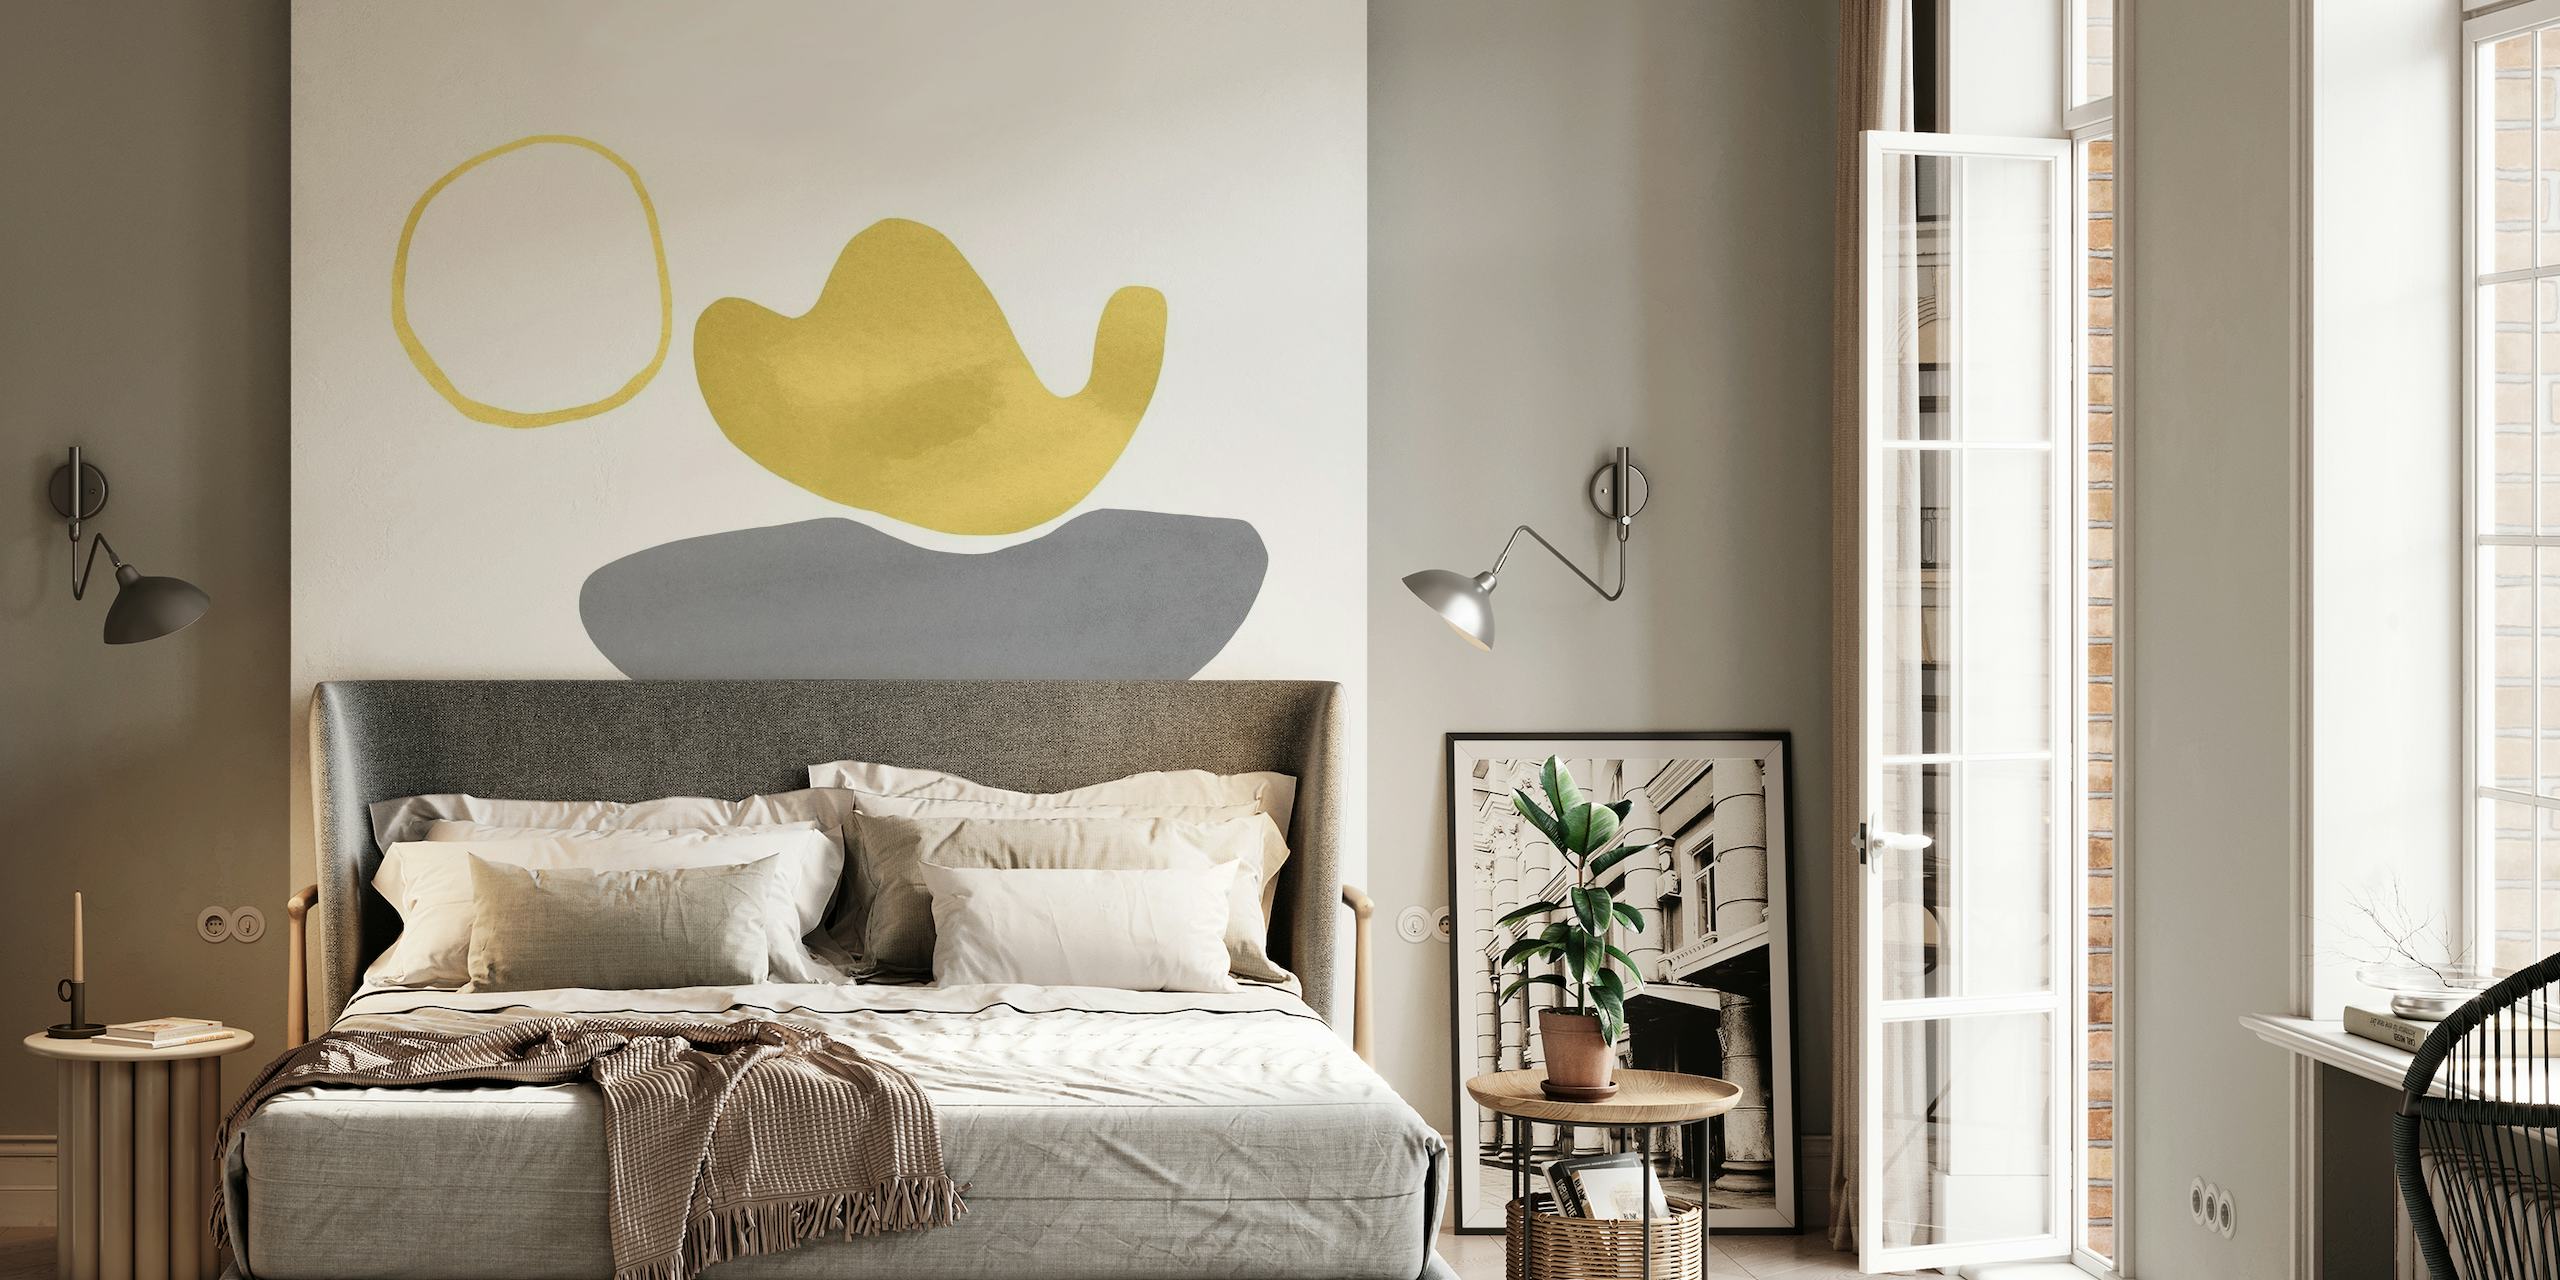 Abstract Yellow Vase wall mural with modern grey shapes